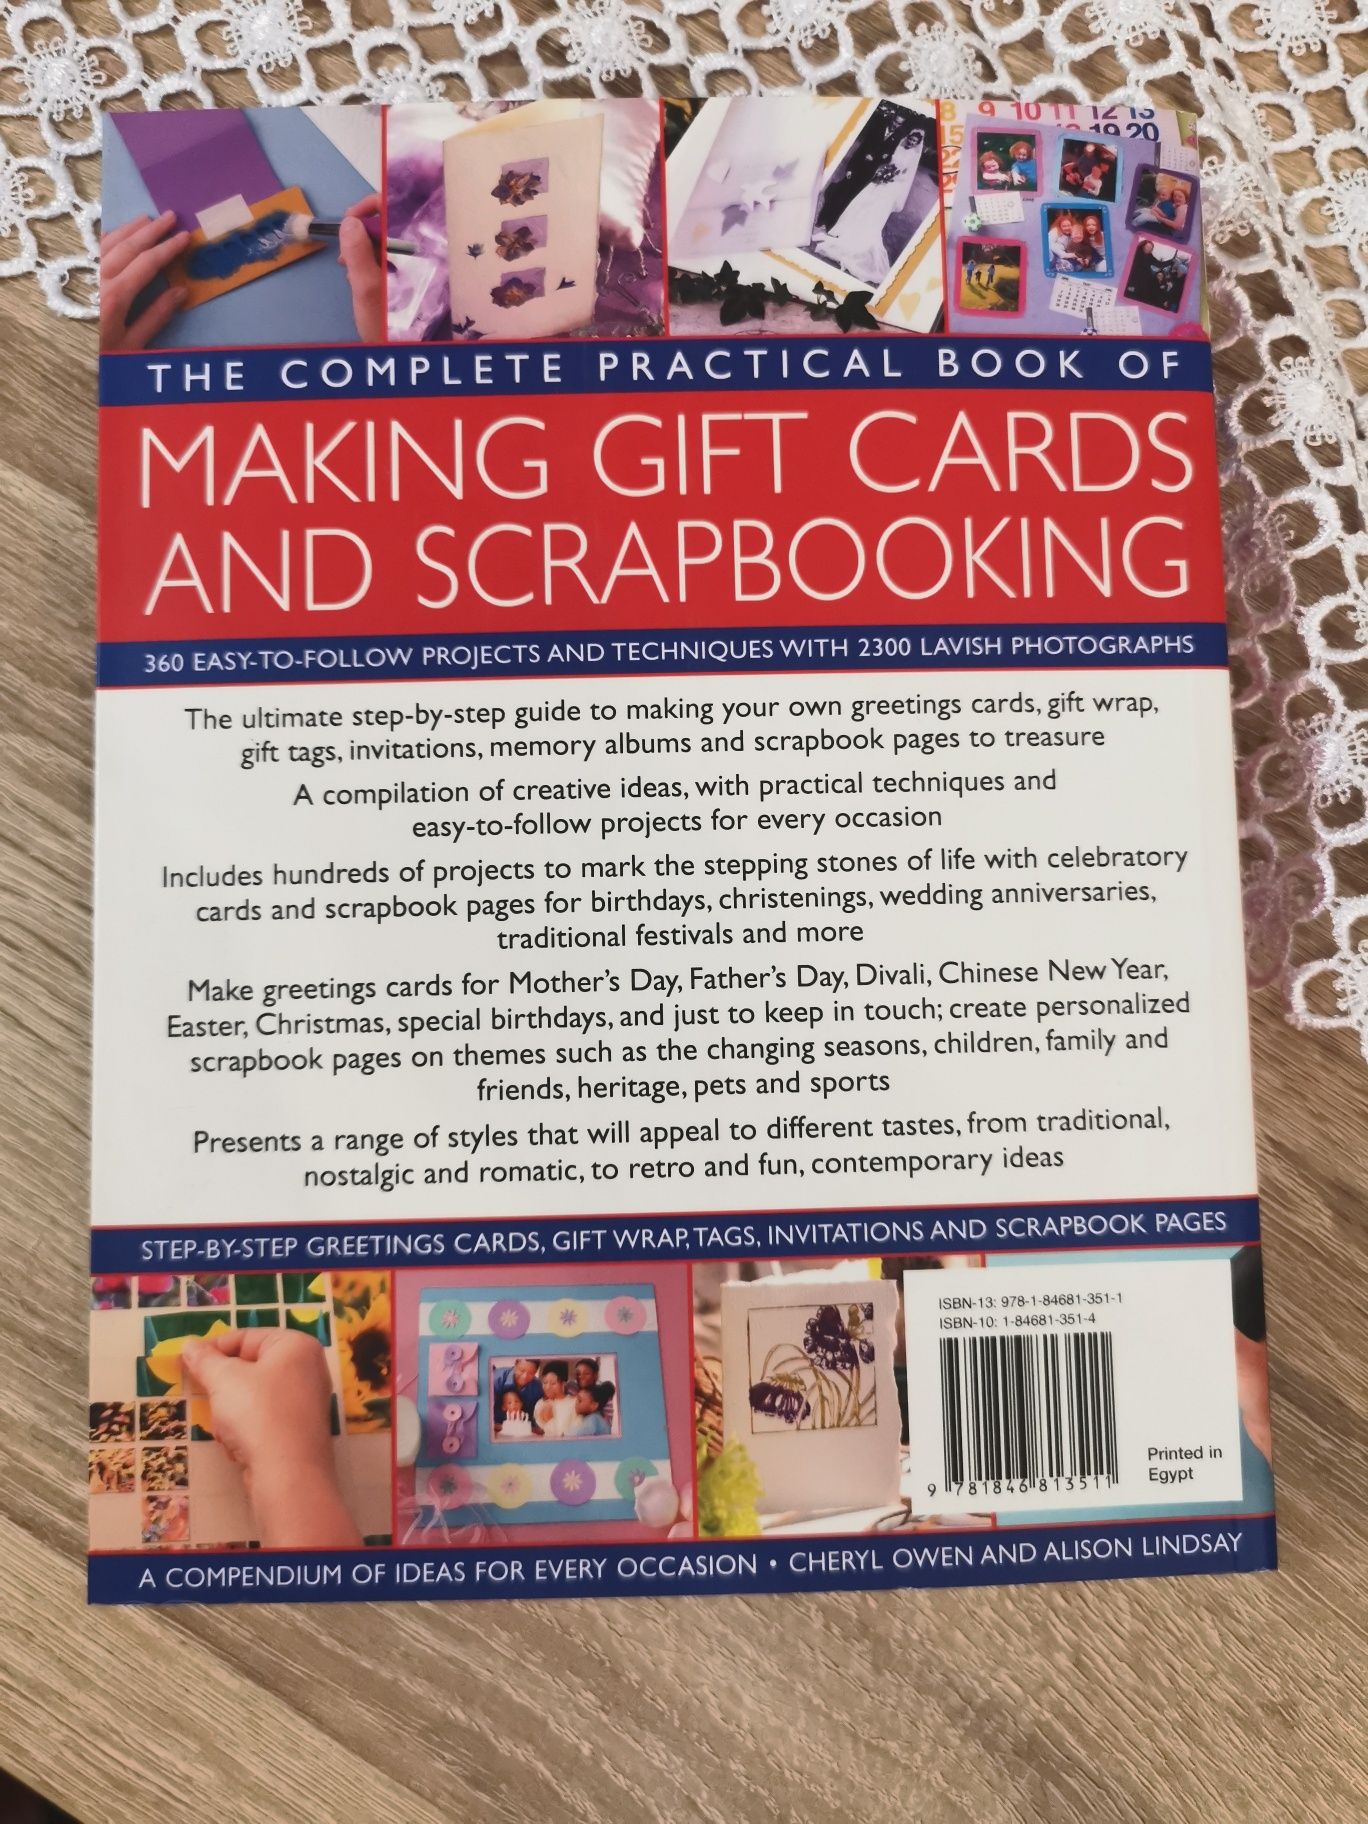 The Complete Practical Book of Making Gift Cards and Scrapbooking 